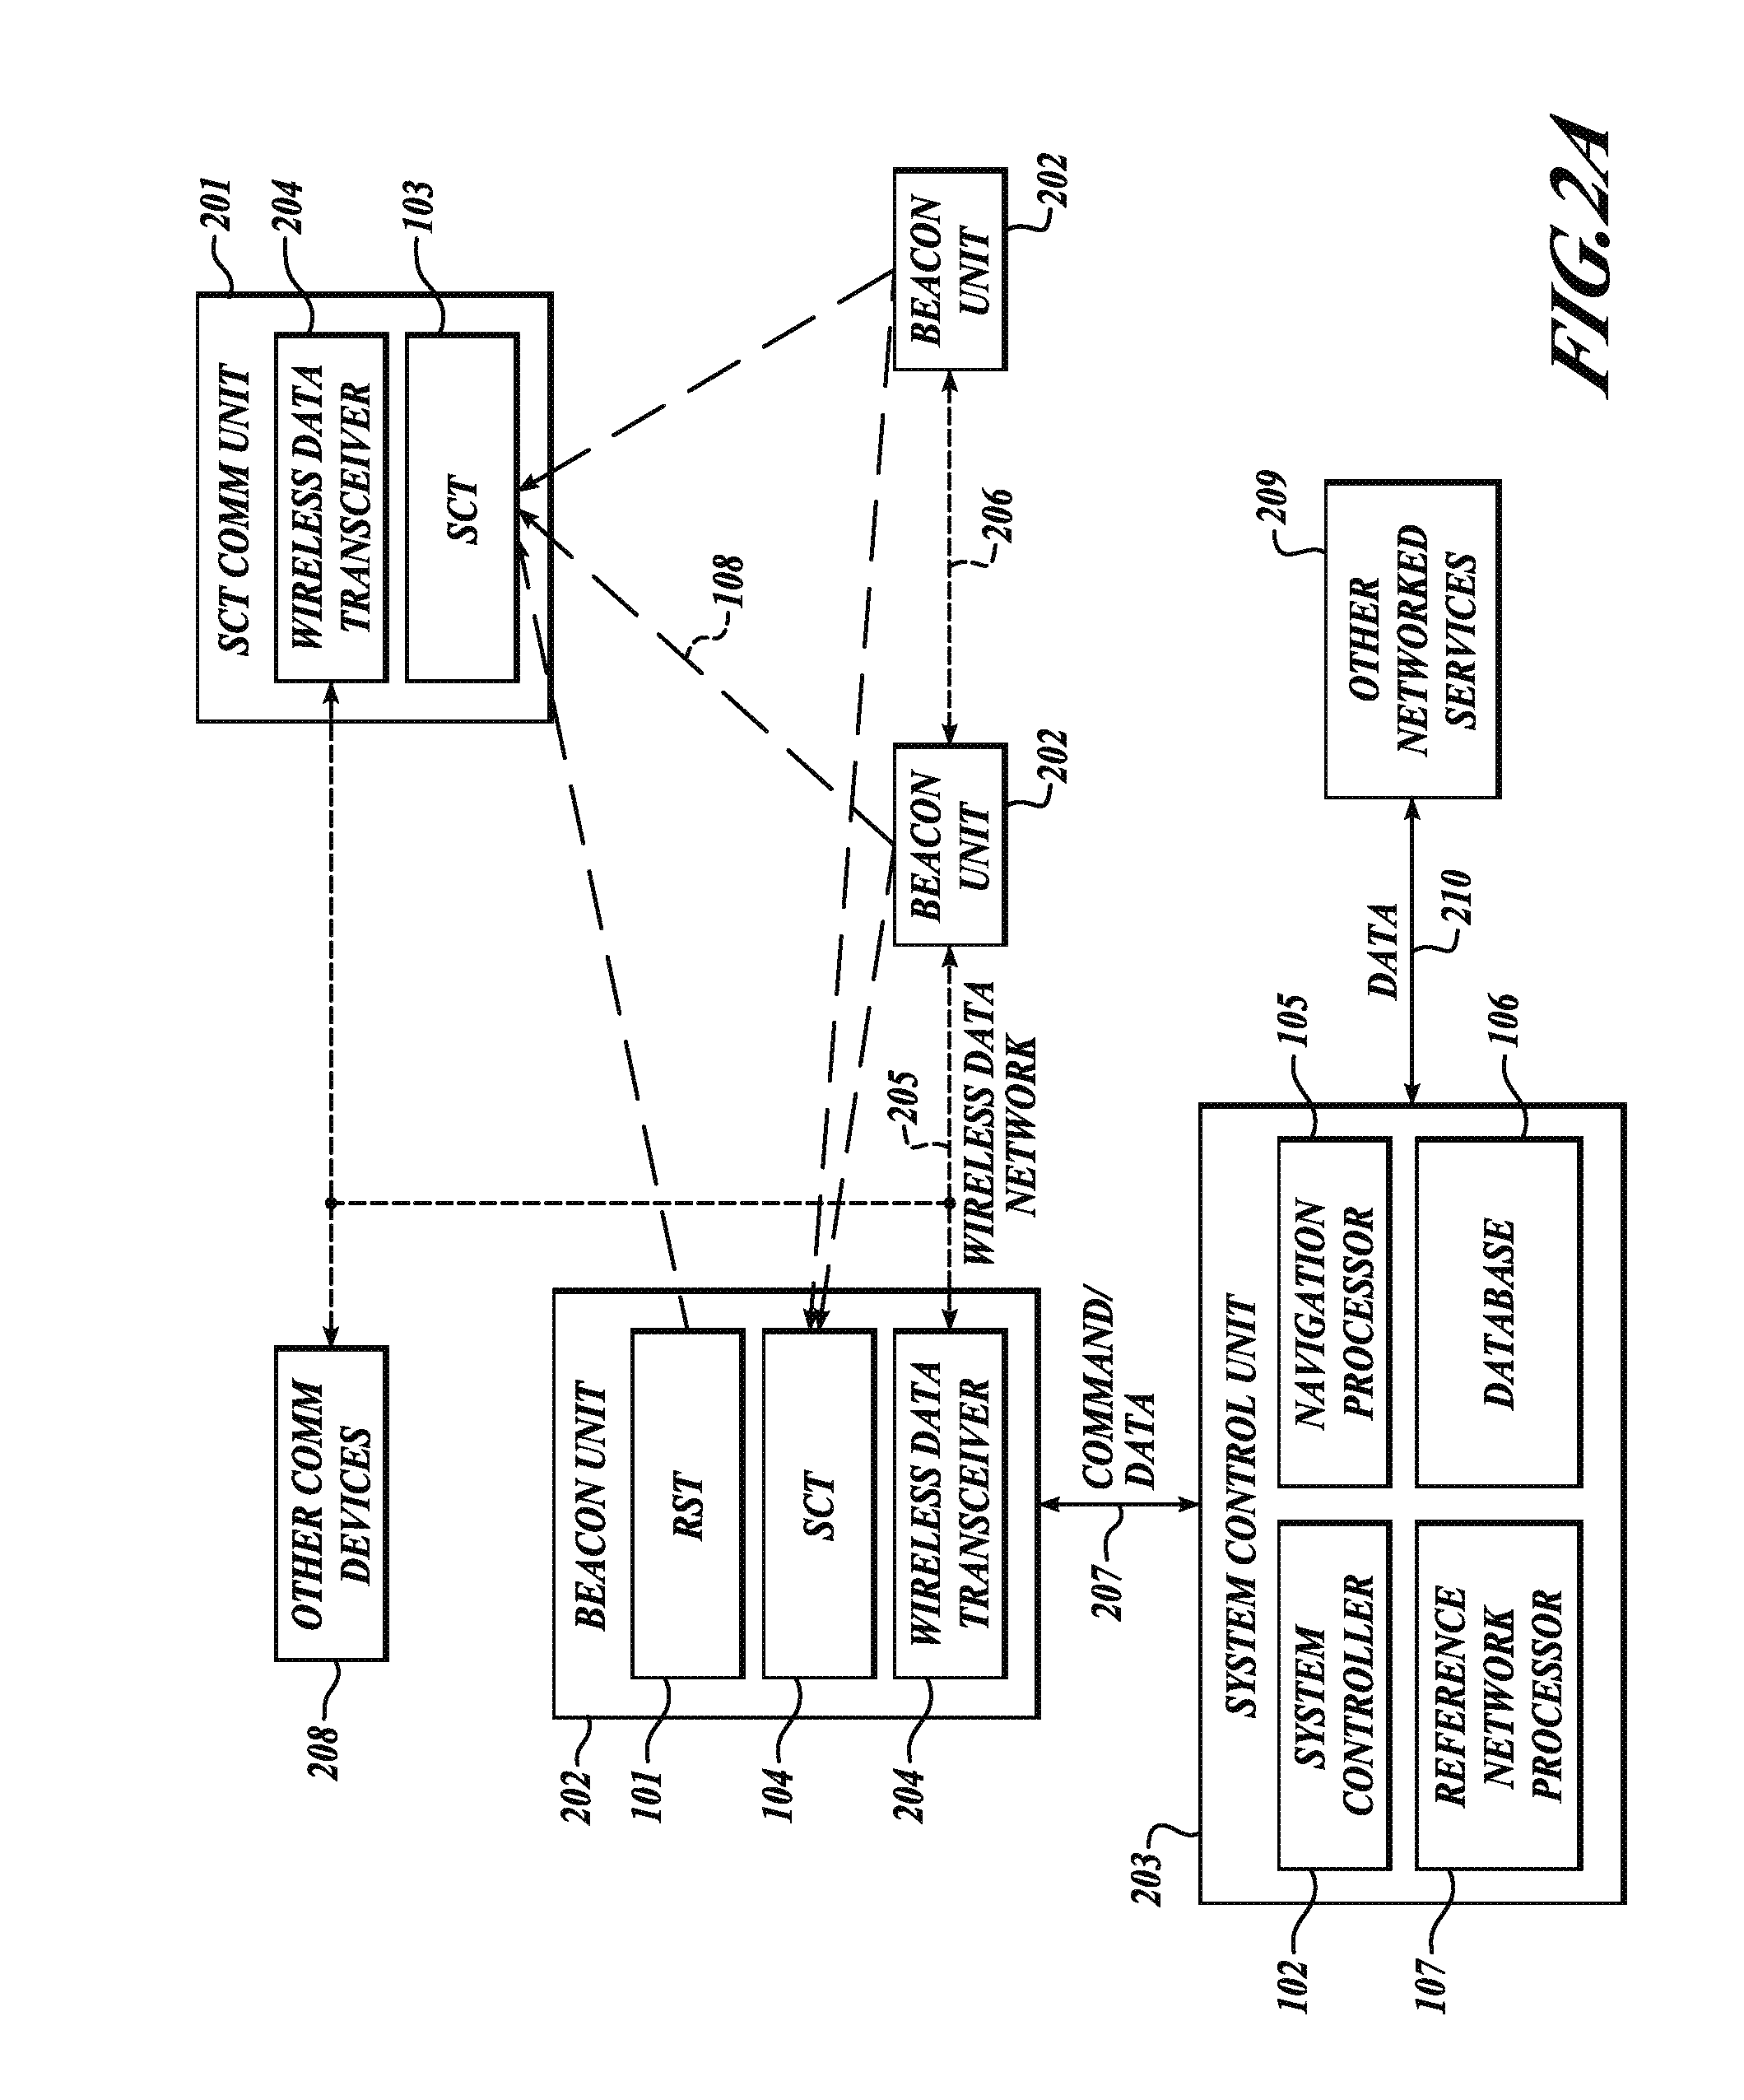 System and method for positioning using hybrid spectral compression and cross correlation signal processing